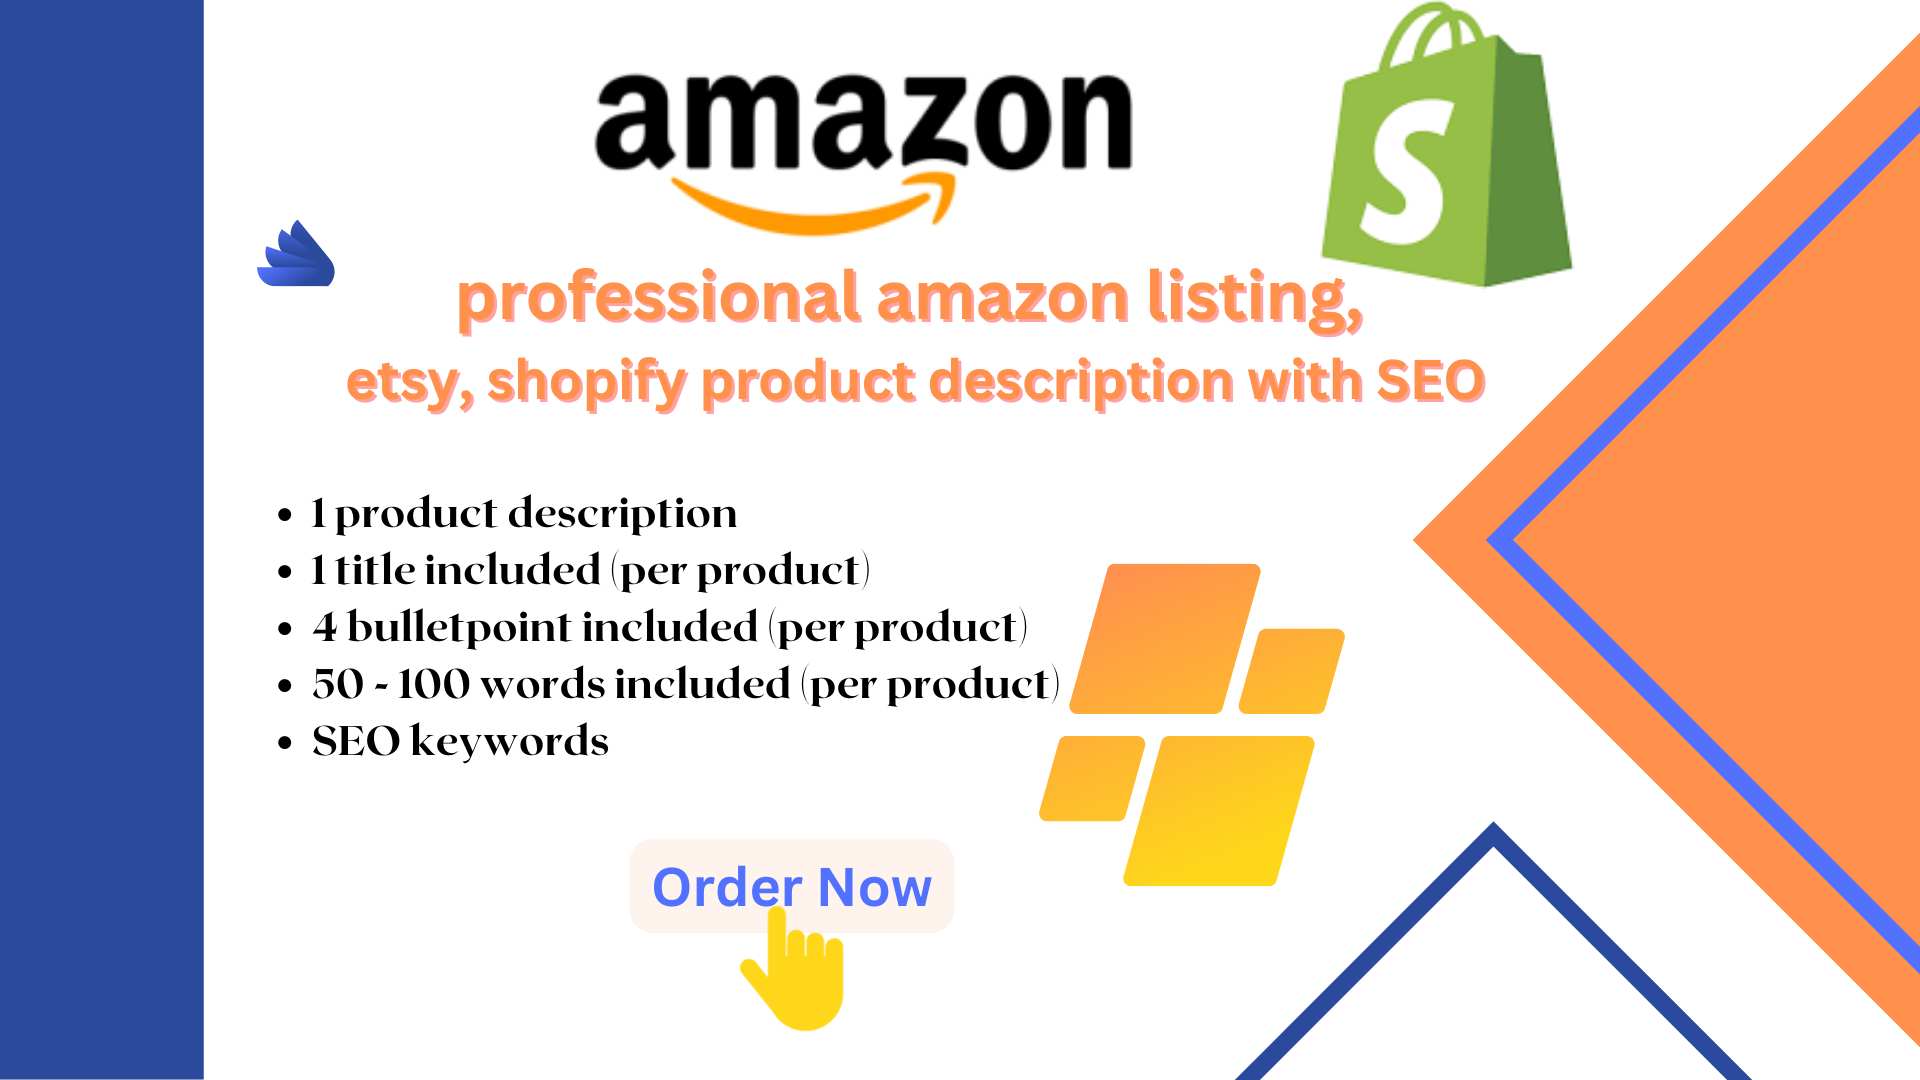 I will write powerful product descriptions for your brand